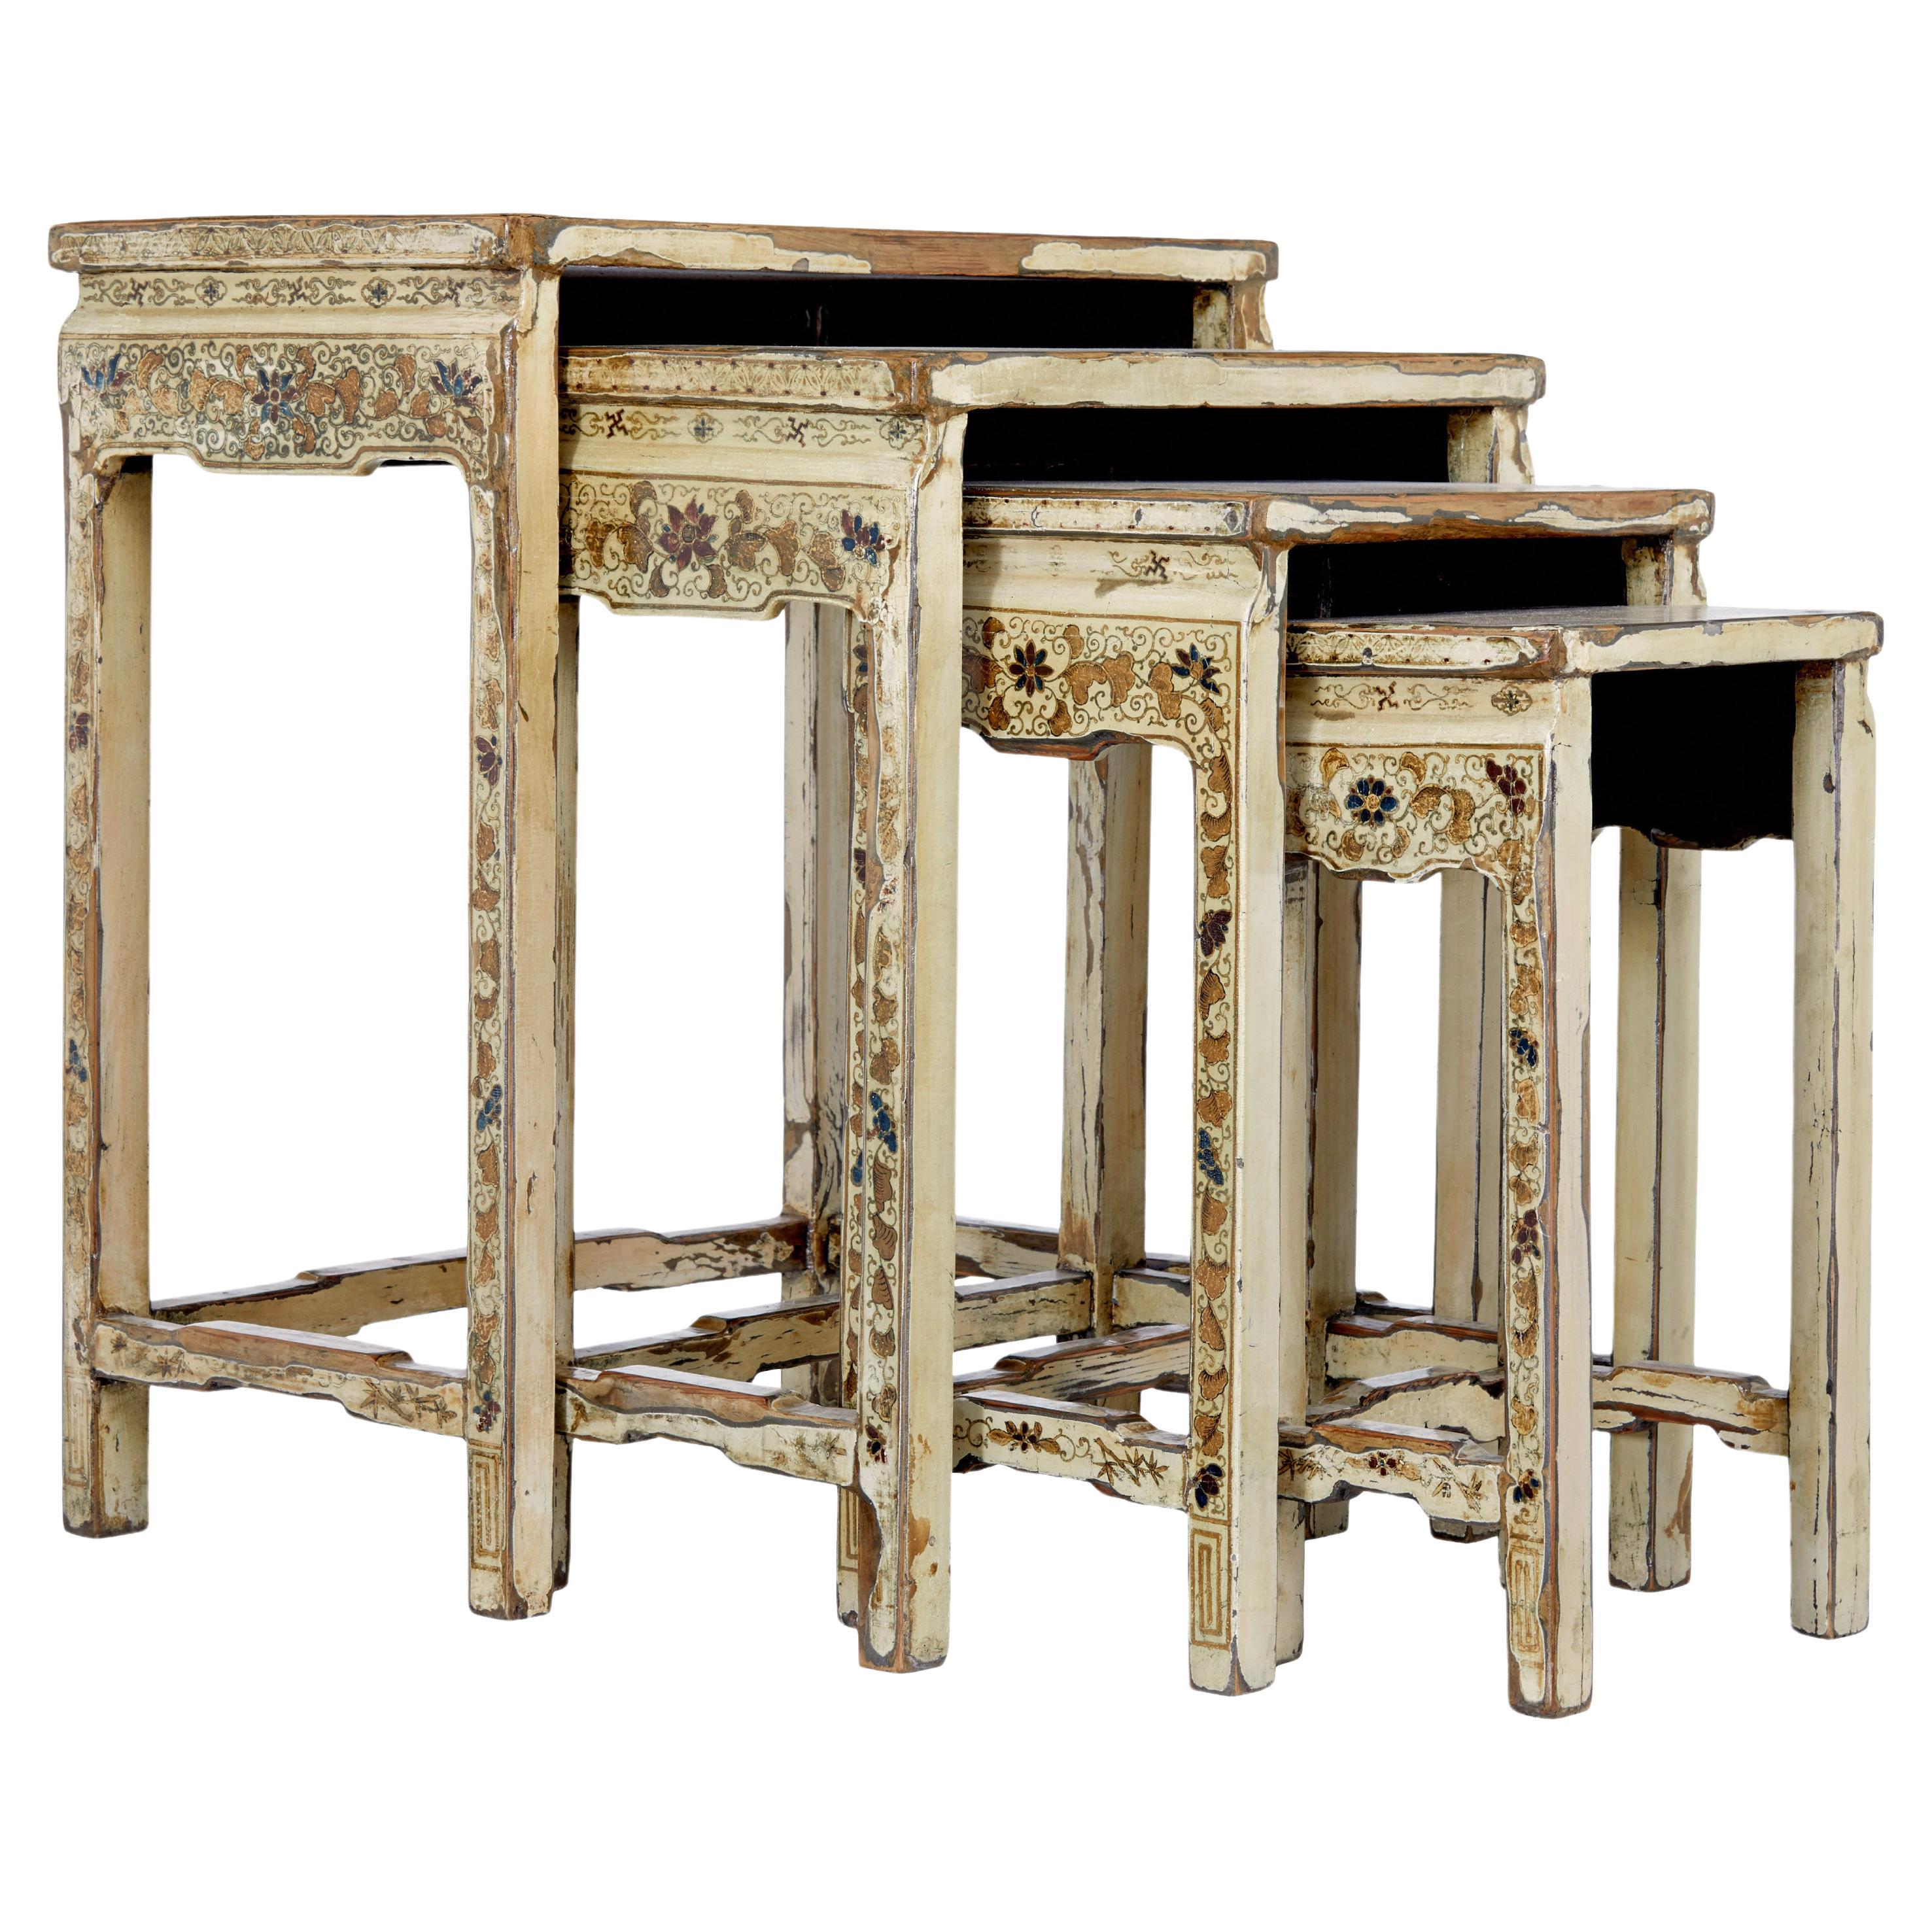 Early 20th century nest of 4 lacquered and decorated tables